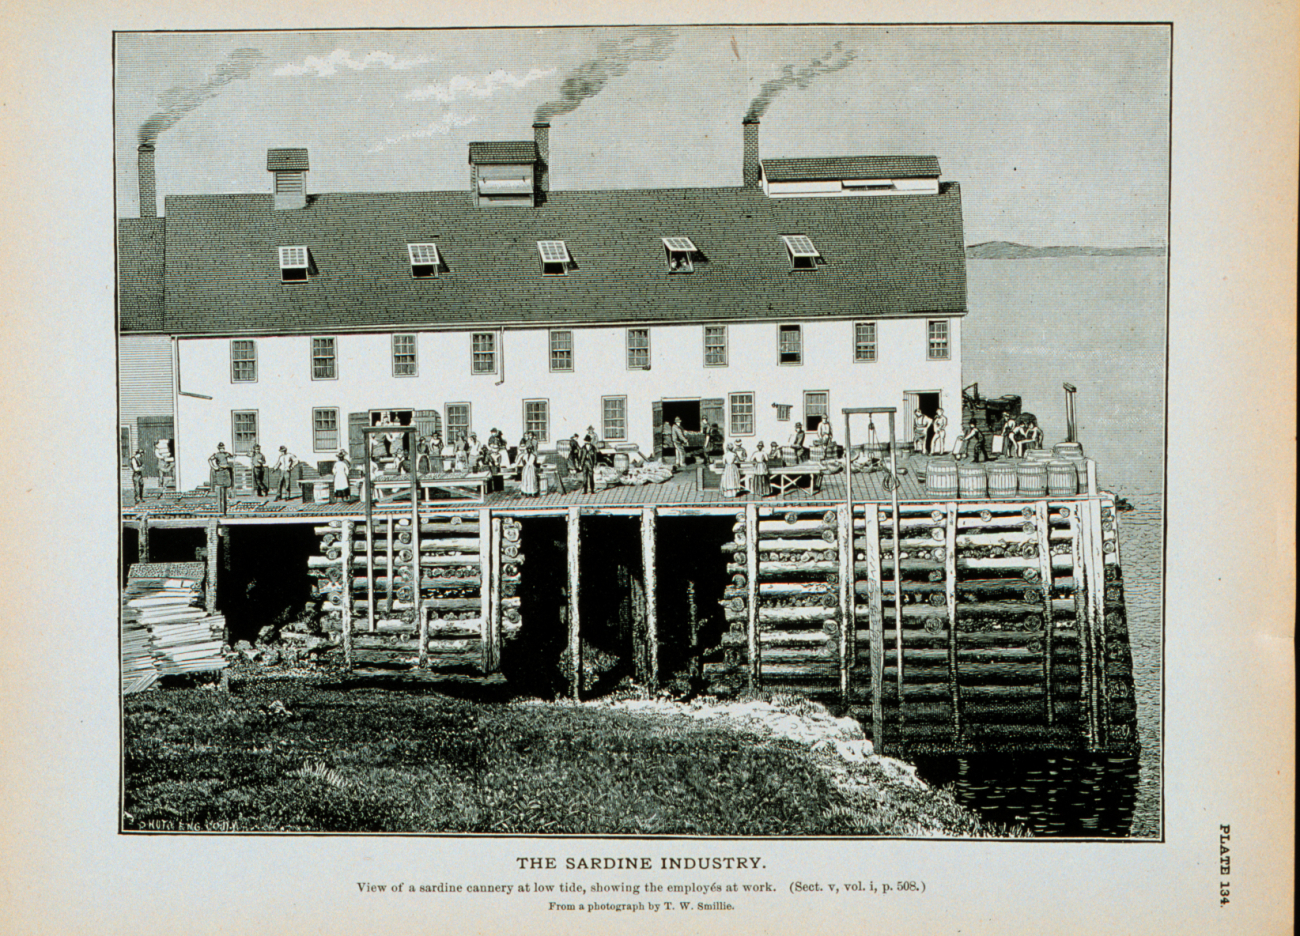 View of sardine cannery at low tide, showing employees at workFrom a photograph by T